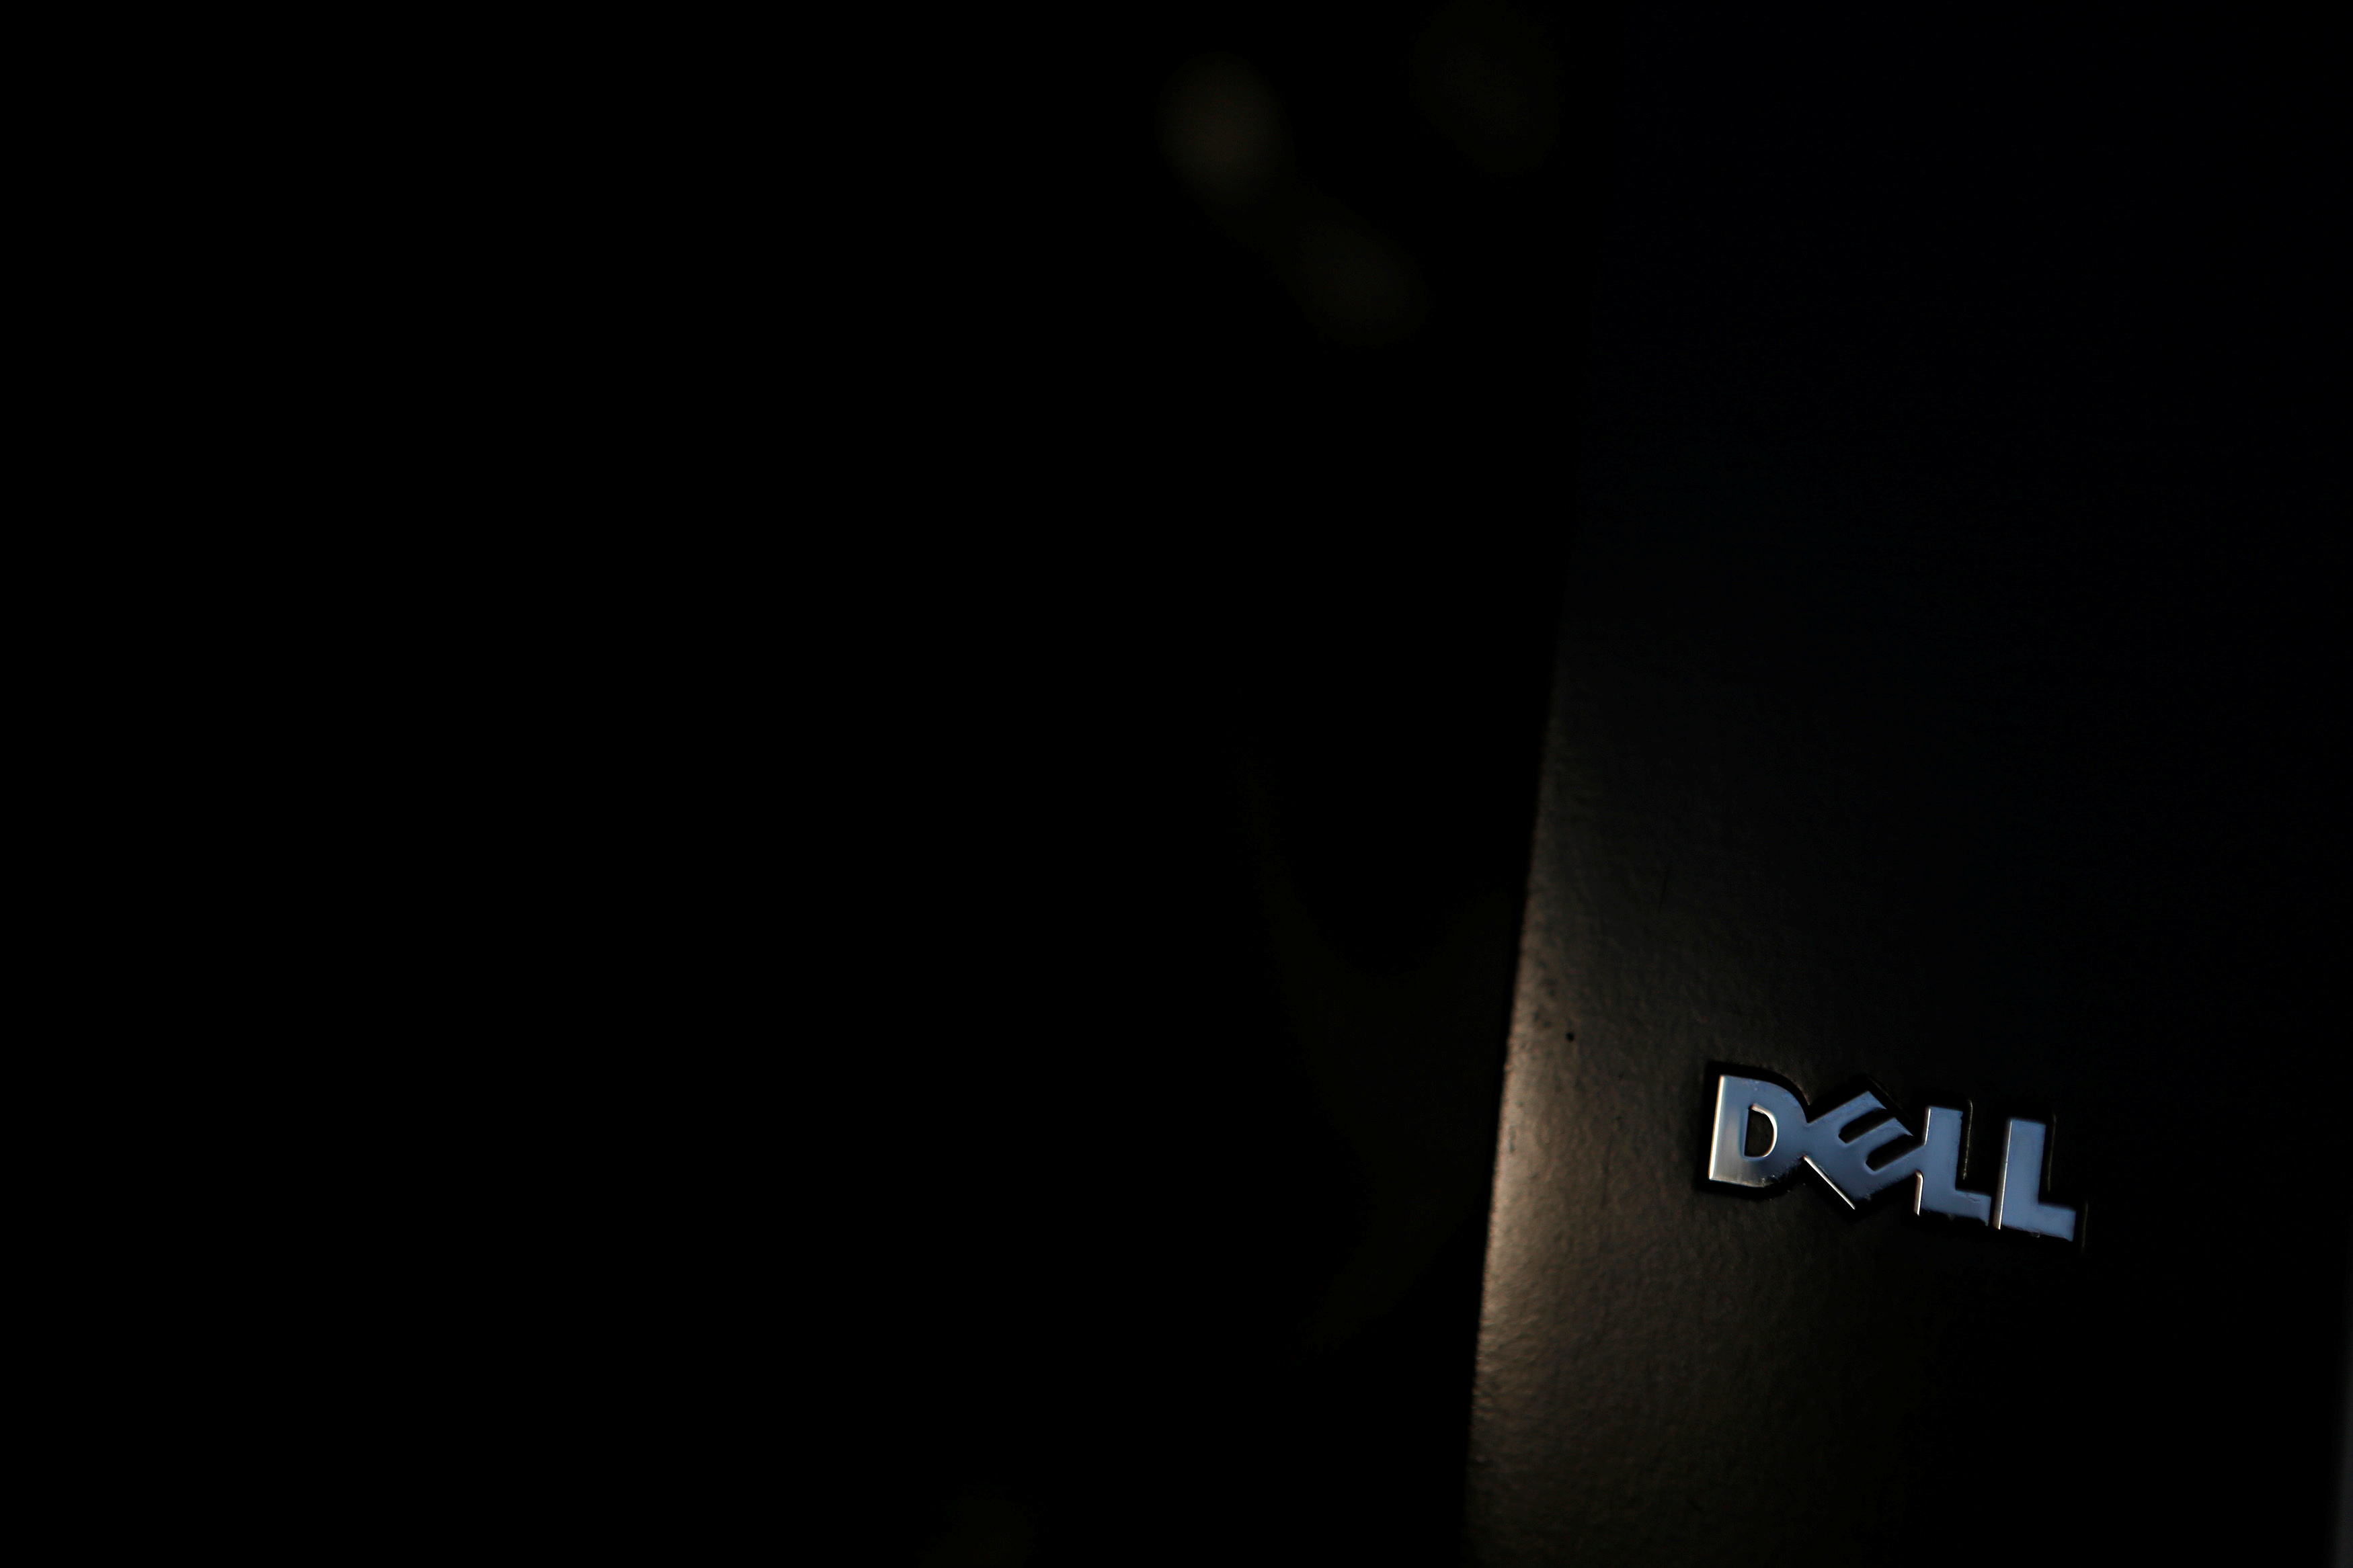 The logo of a Dell laptop computer is pictured in Pasadena, California July 17, 2013. REUTERS/Mario Anzuoni/File Photo